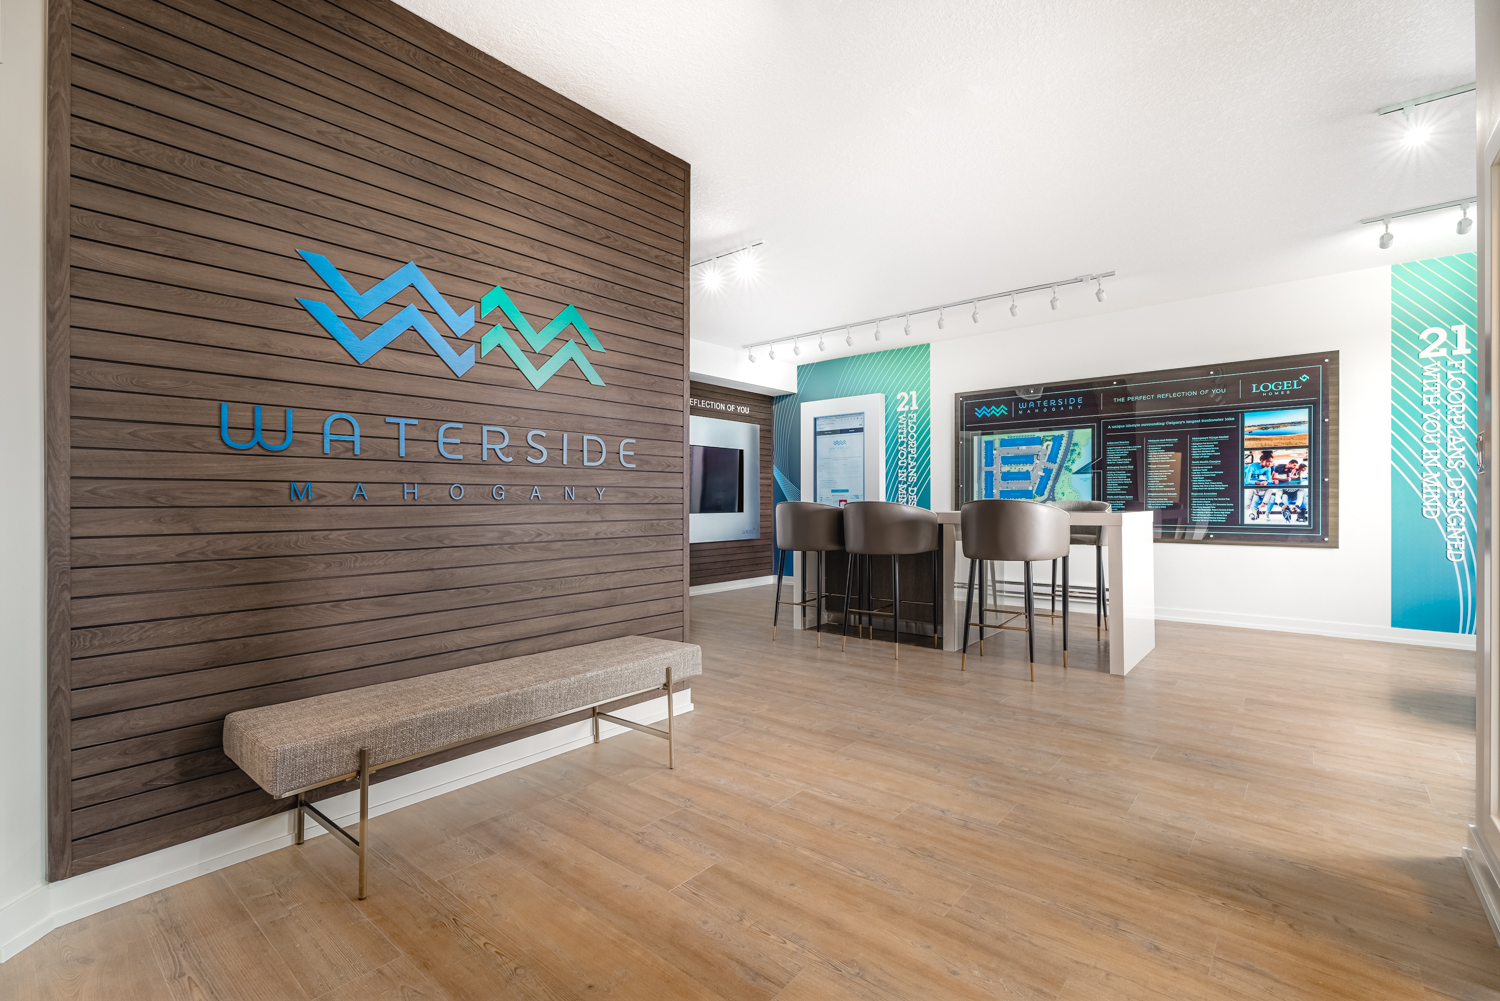 Waterside at Mahogany Sales Centre interior featuring a wooden feature wall with the logo, display island, and large community map with two interactive screens on either side.